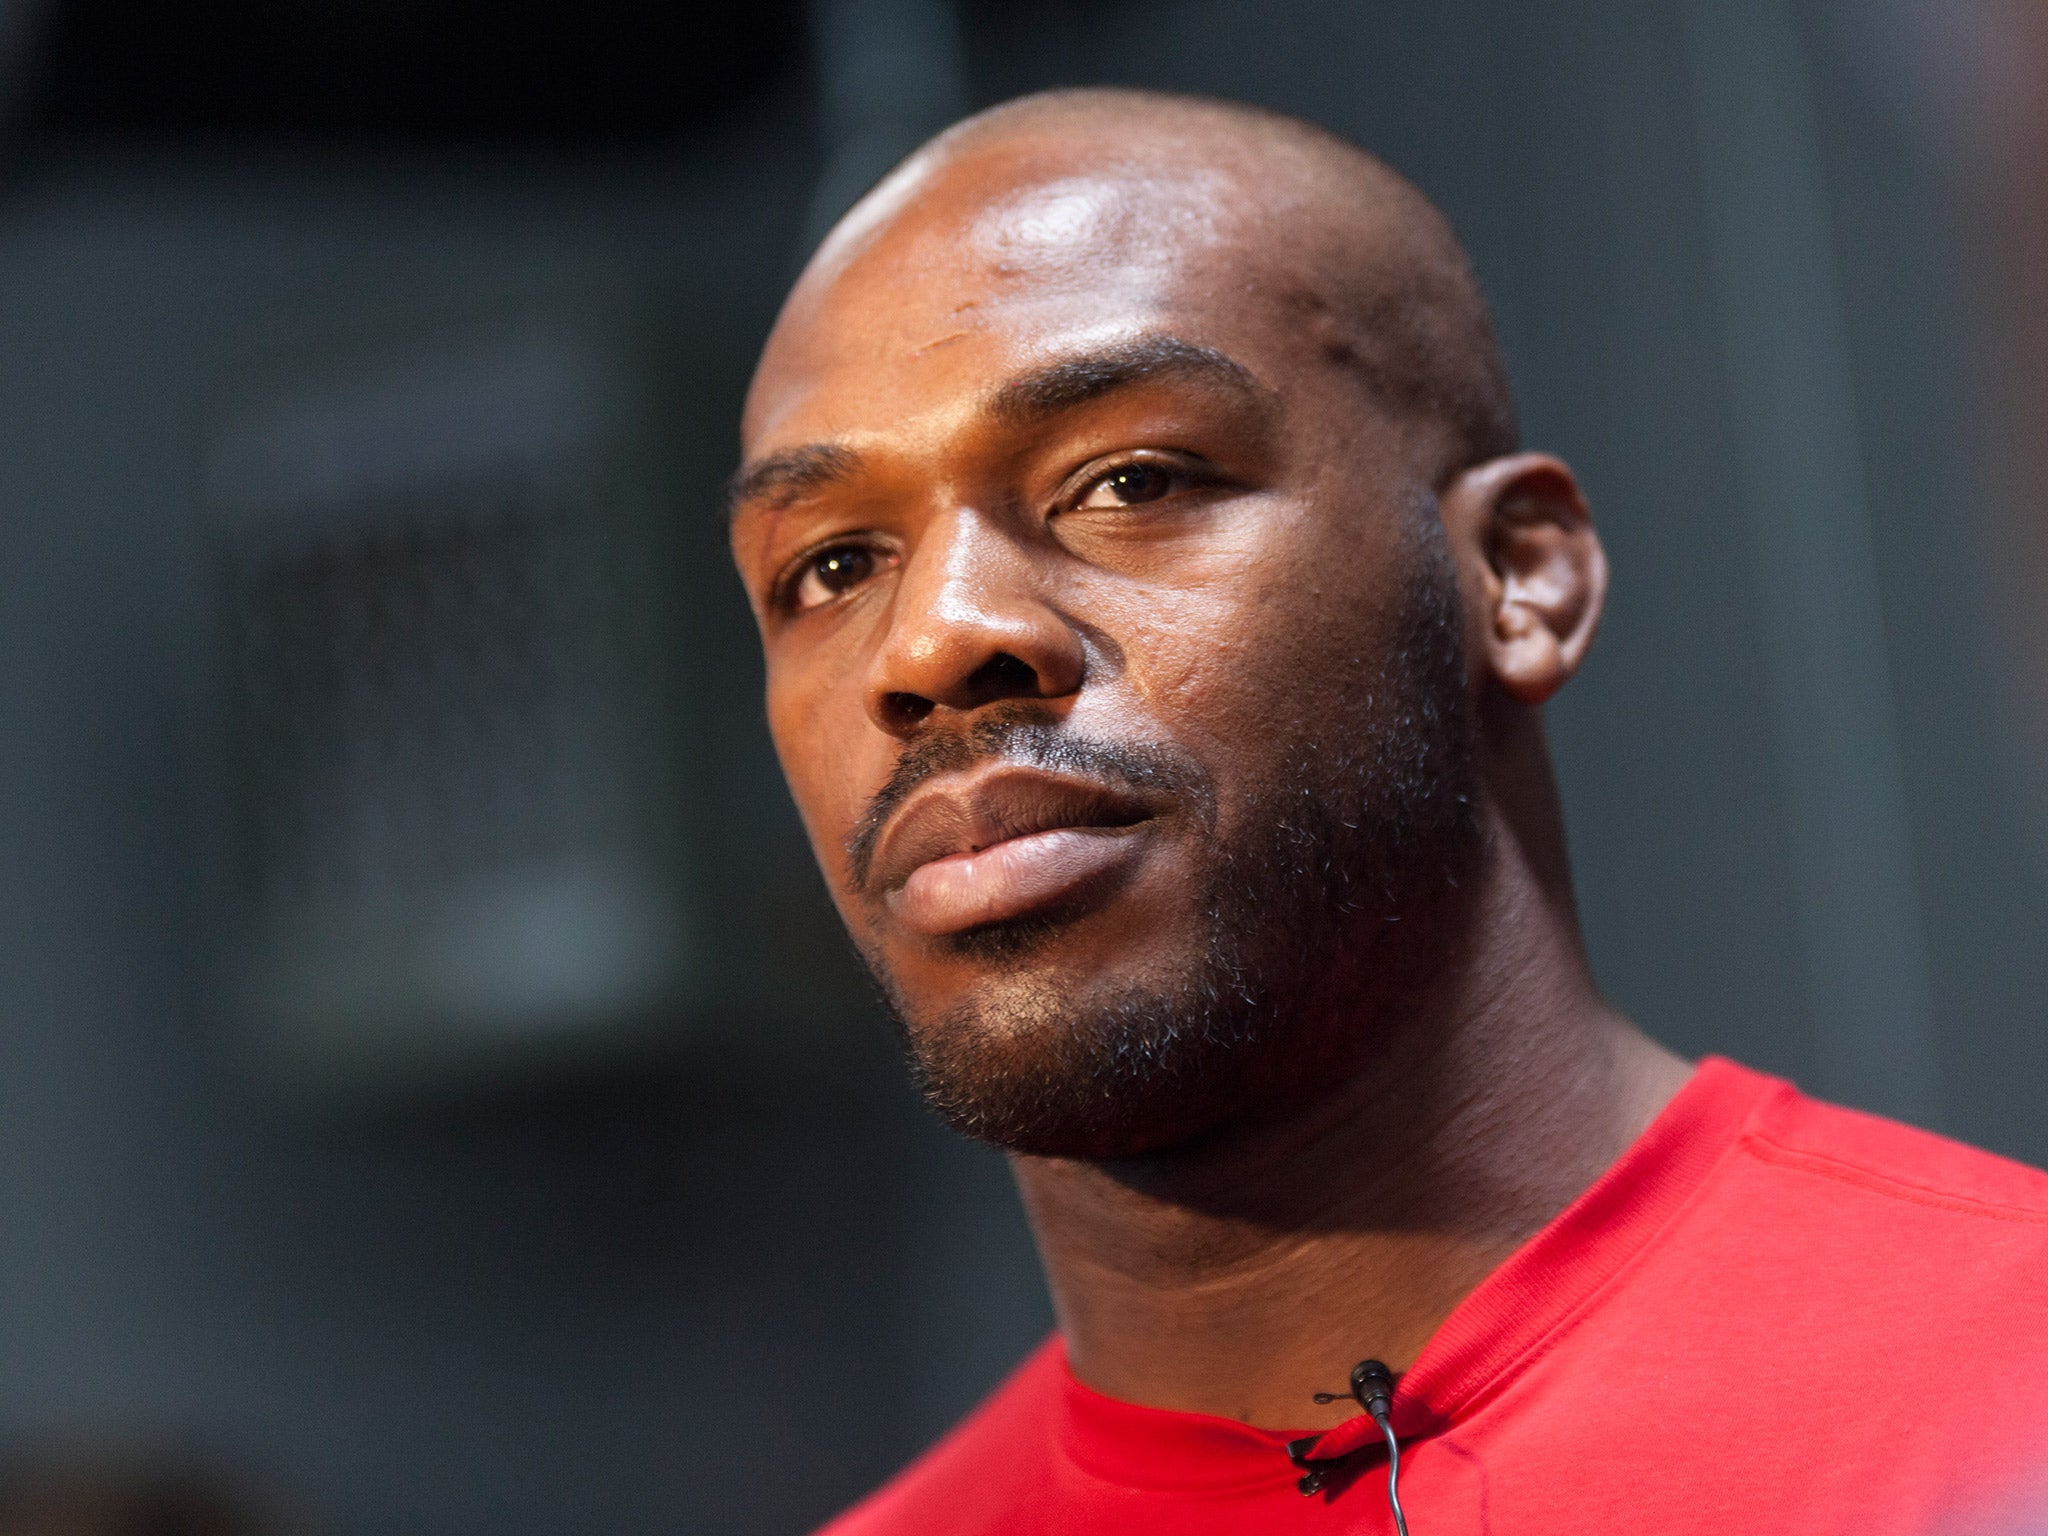 Jon Jones revealed he was pulled over and given a ticket for allegedly drag racing